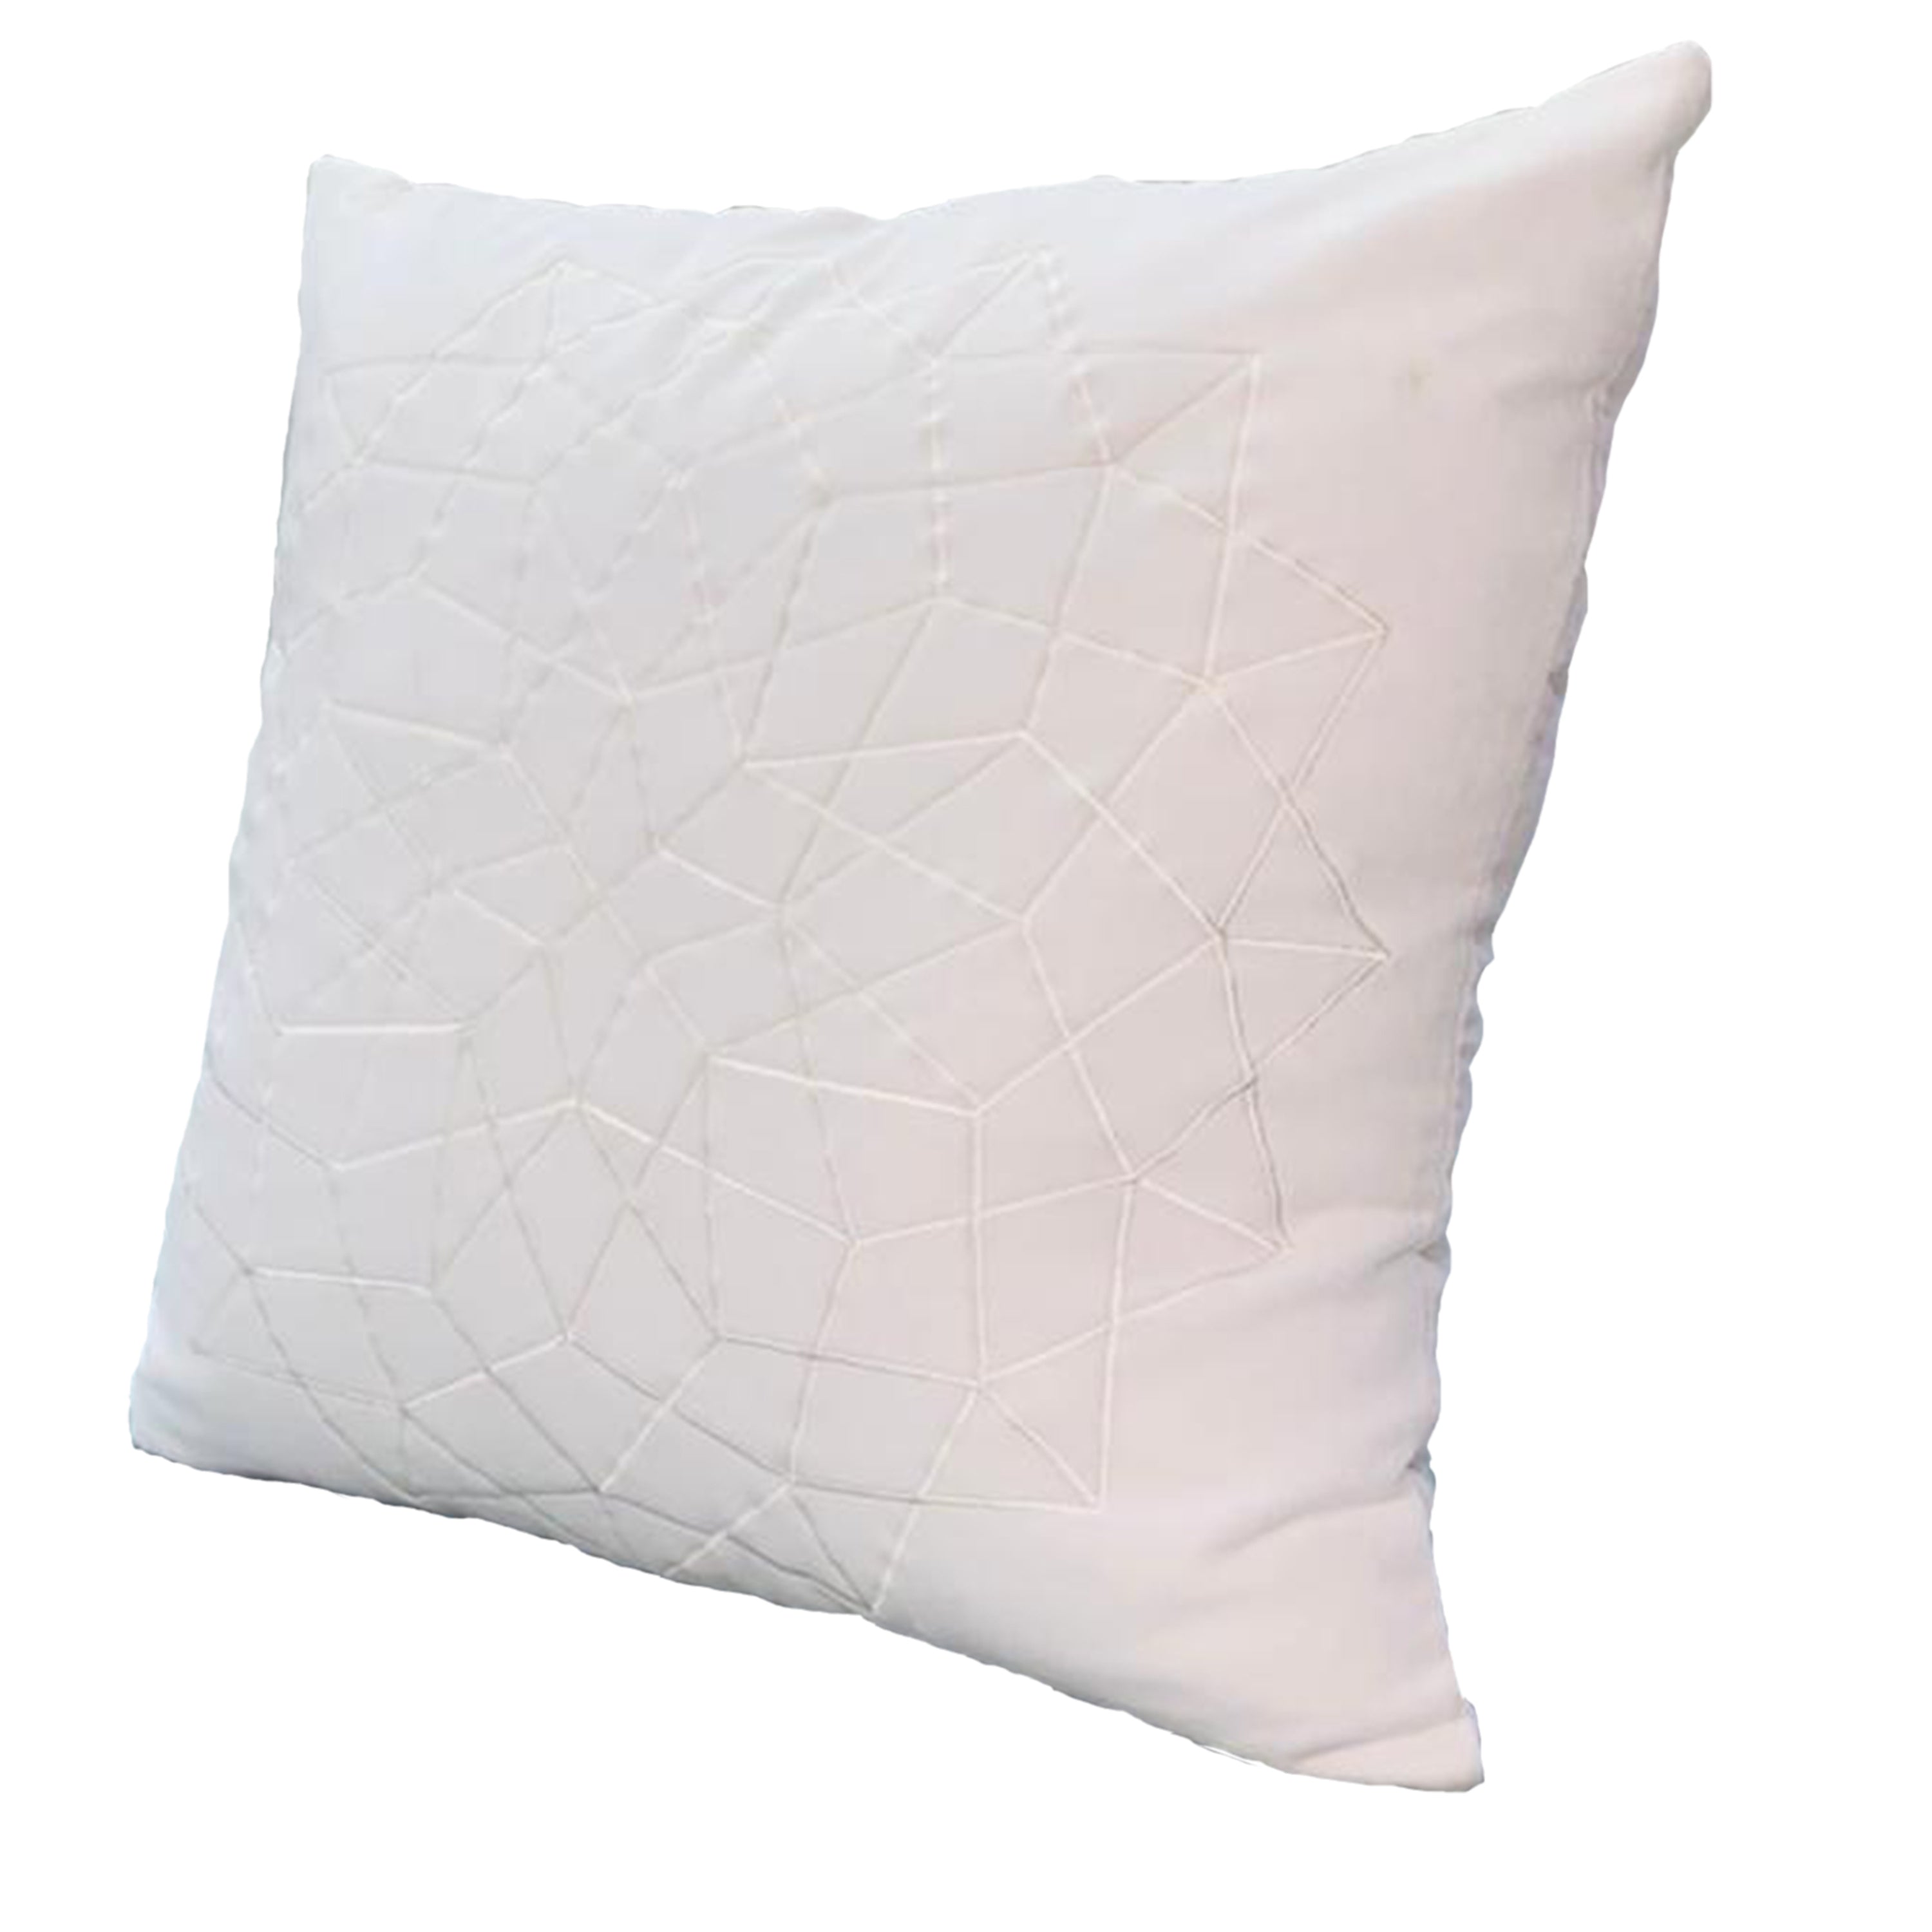 Square Accent Throw Pillow, Embroidered Geometric Abstract Pattern, With Filler - White